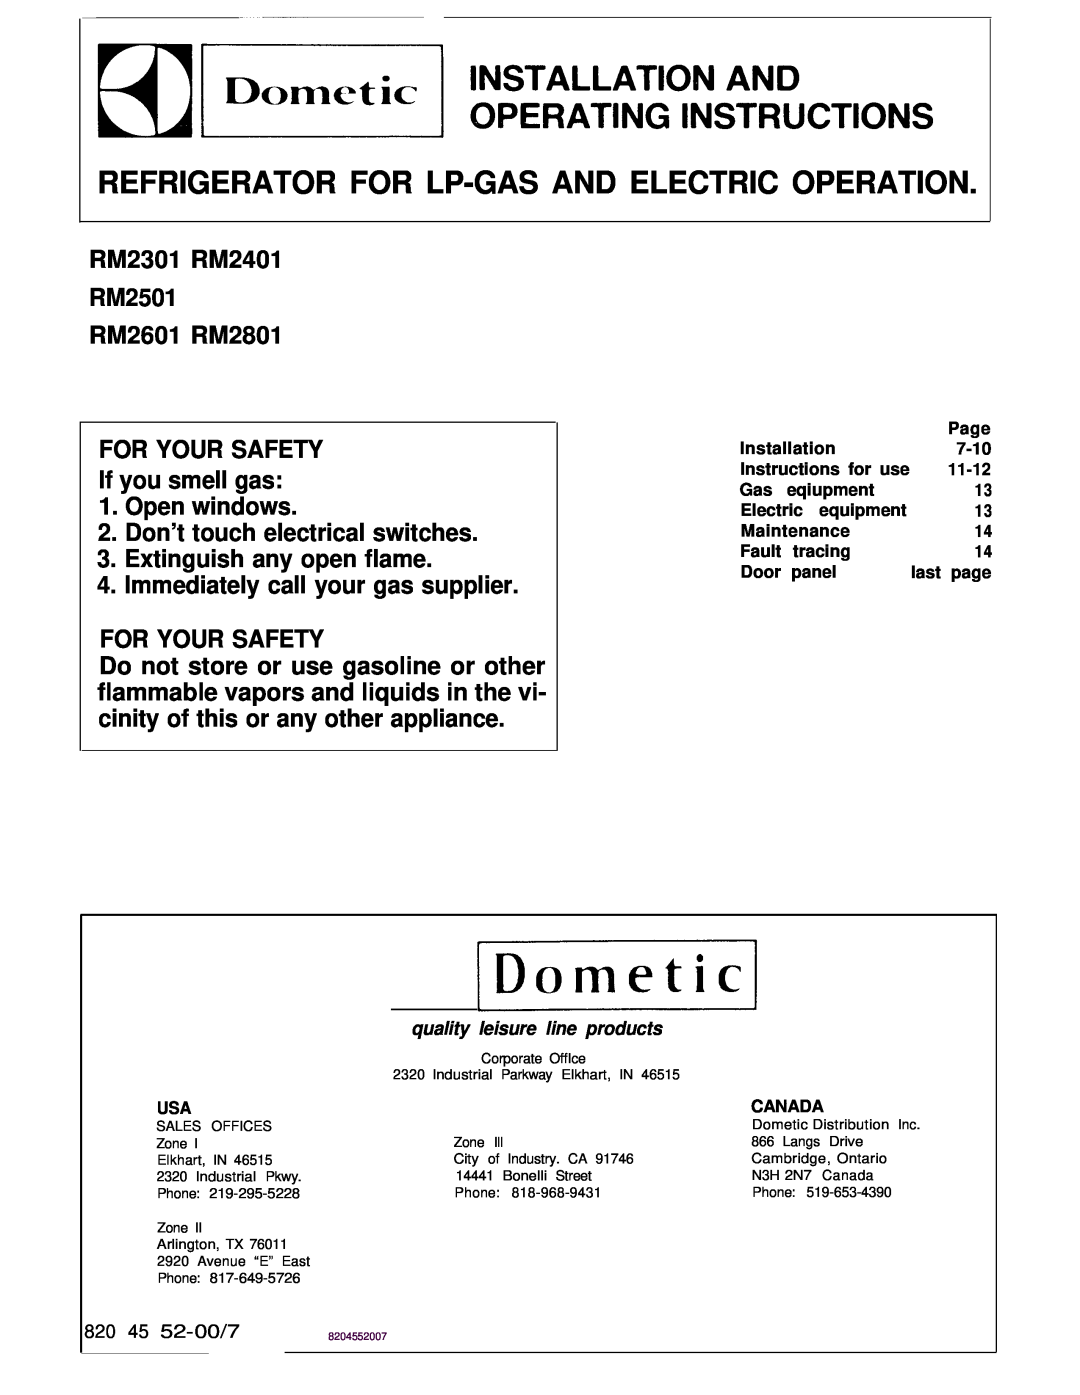 Dometic RM2501 manual Refrigerator For Lp-Gasand Electric Operation, Installation, Page, 7-10, Instructions for use, 11-12 